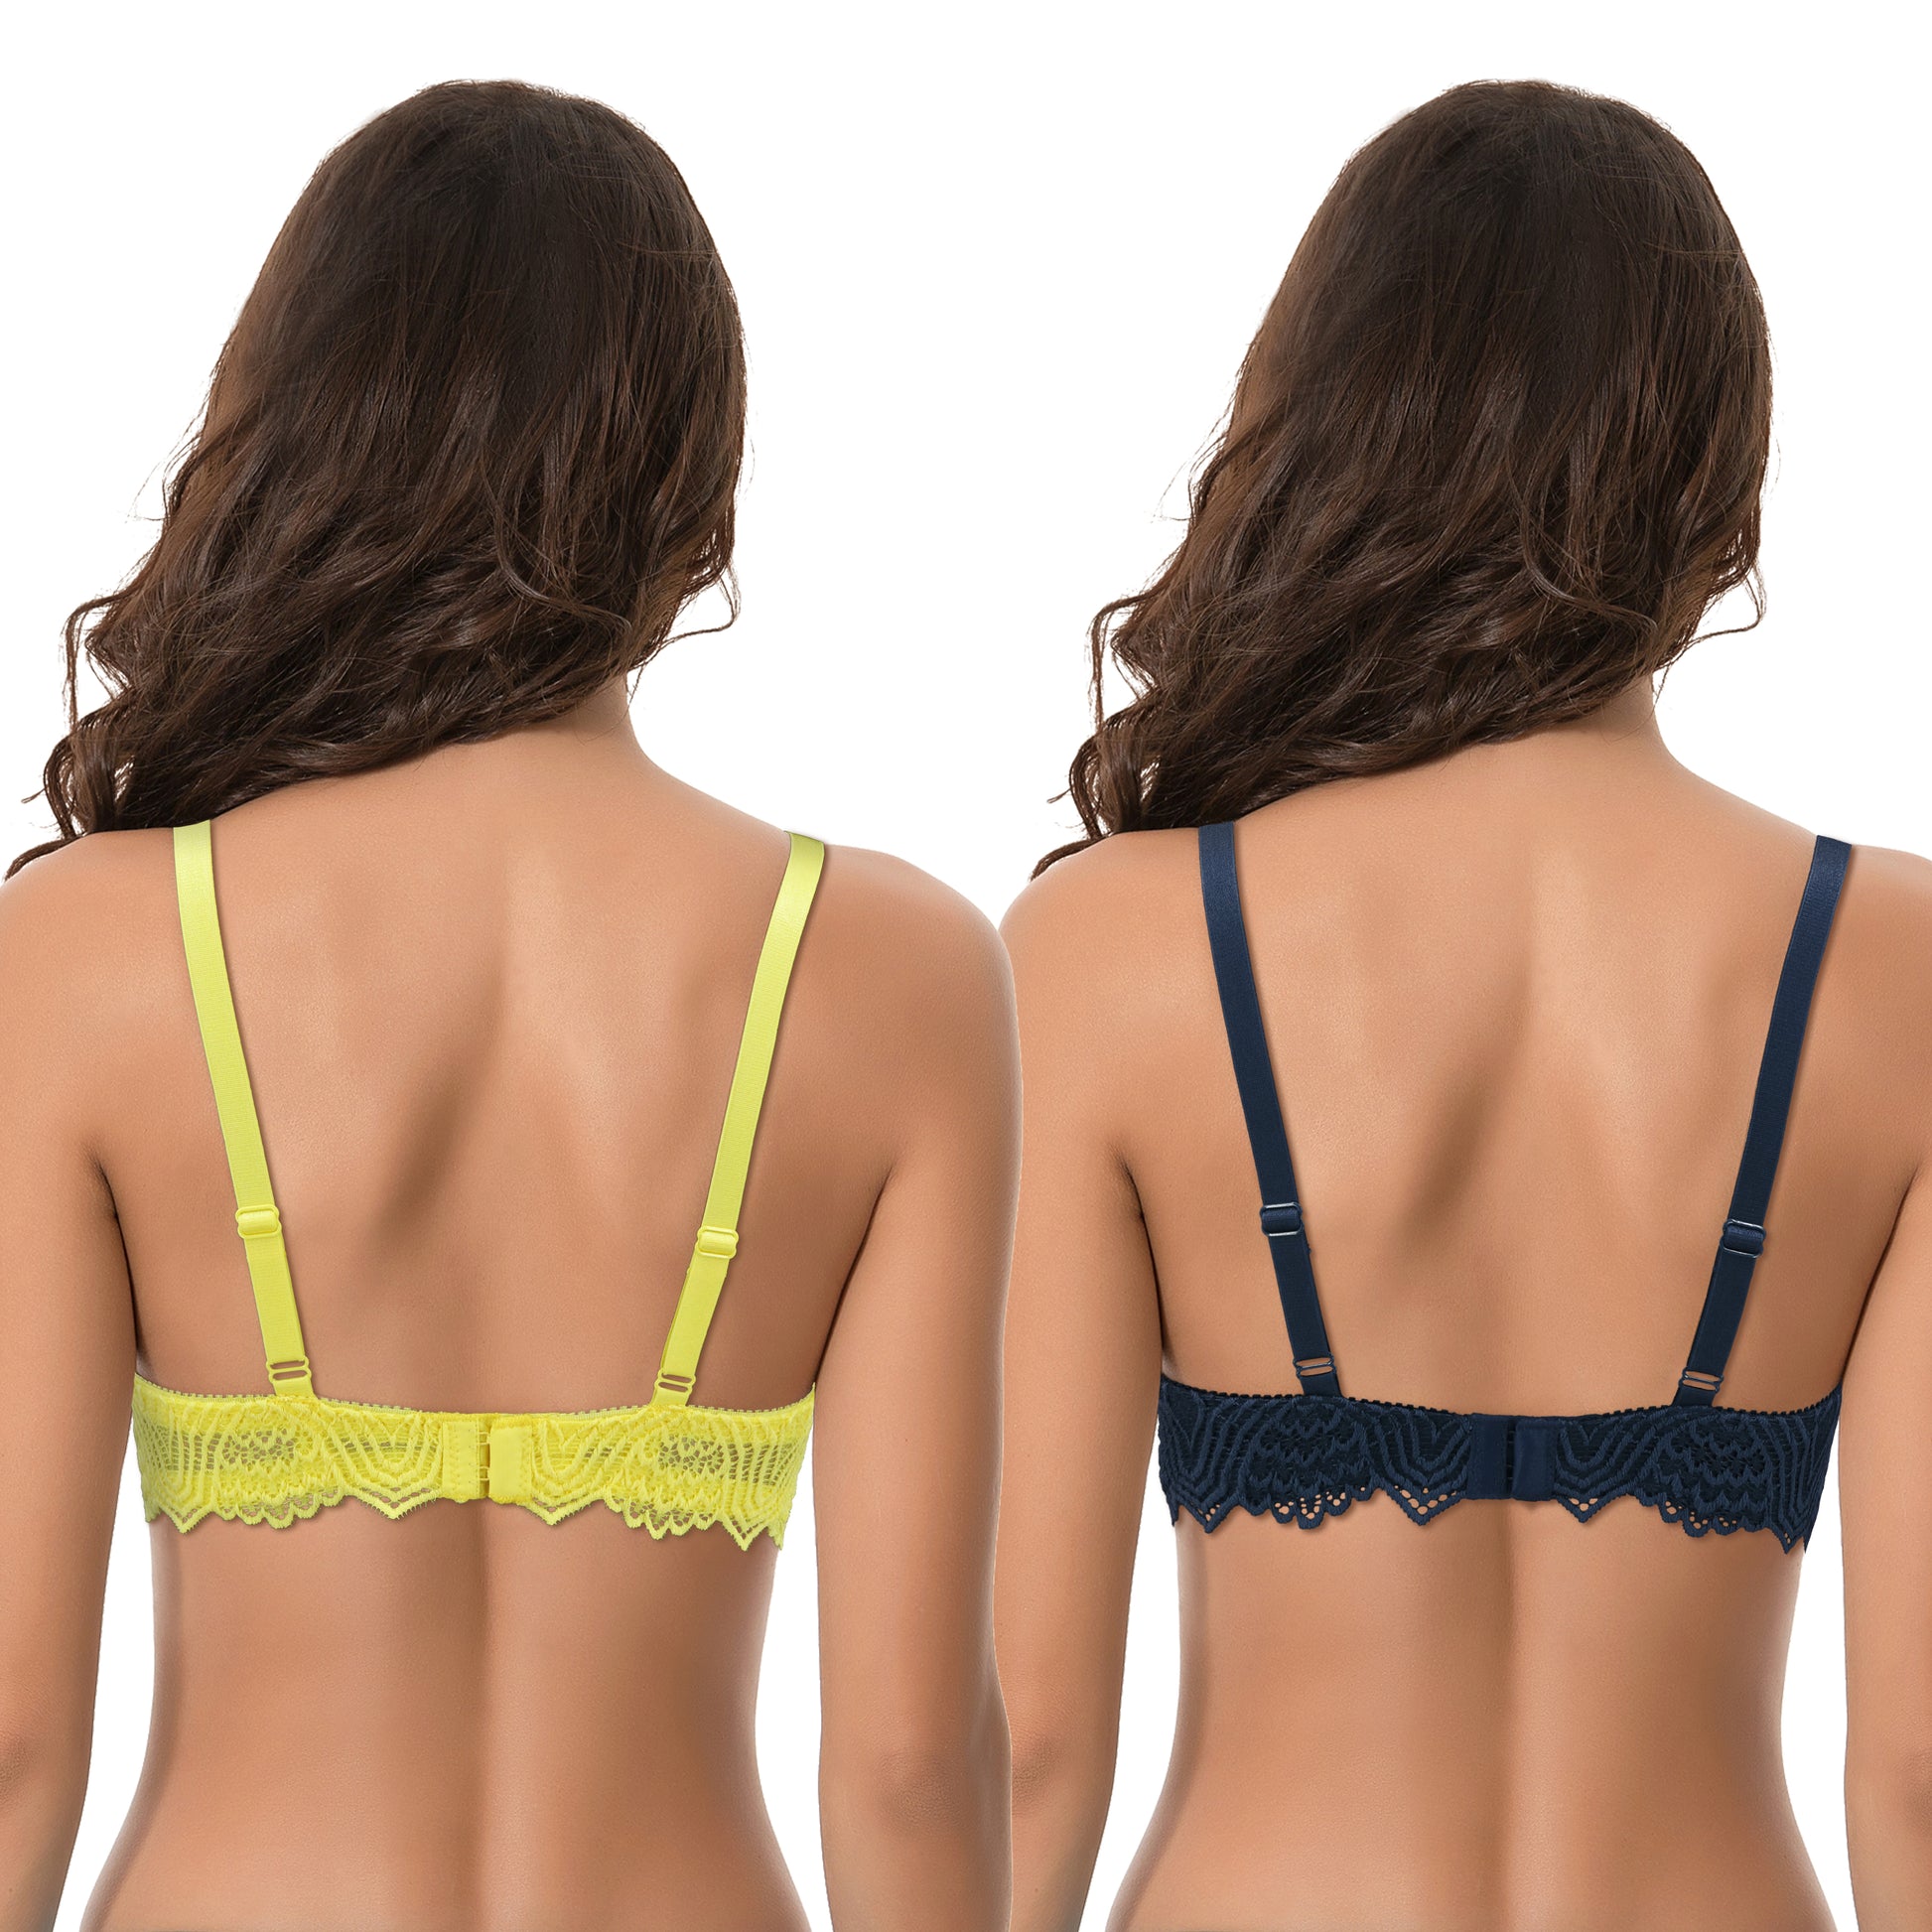 Curve Muse Women's Plus Size Push Up Add 1 Cup Underwire Perfect Shape Lace  Bras-2Pk-Navy,Yellow-36DDD 